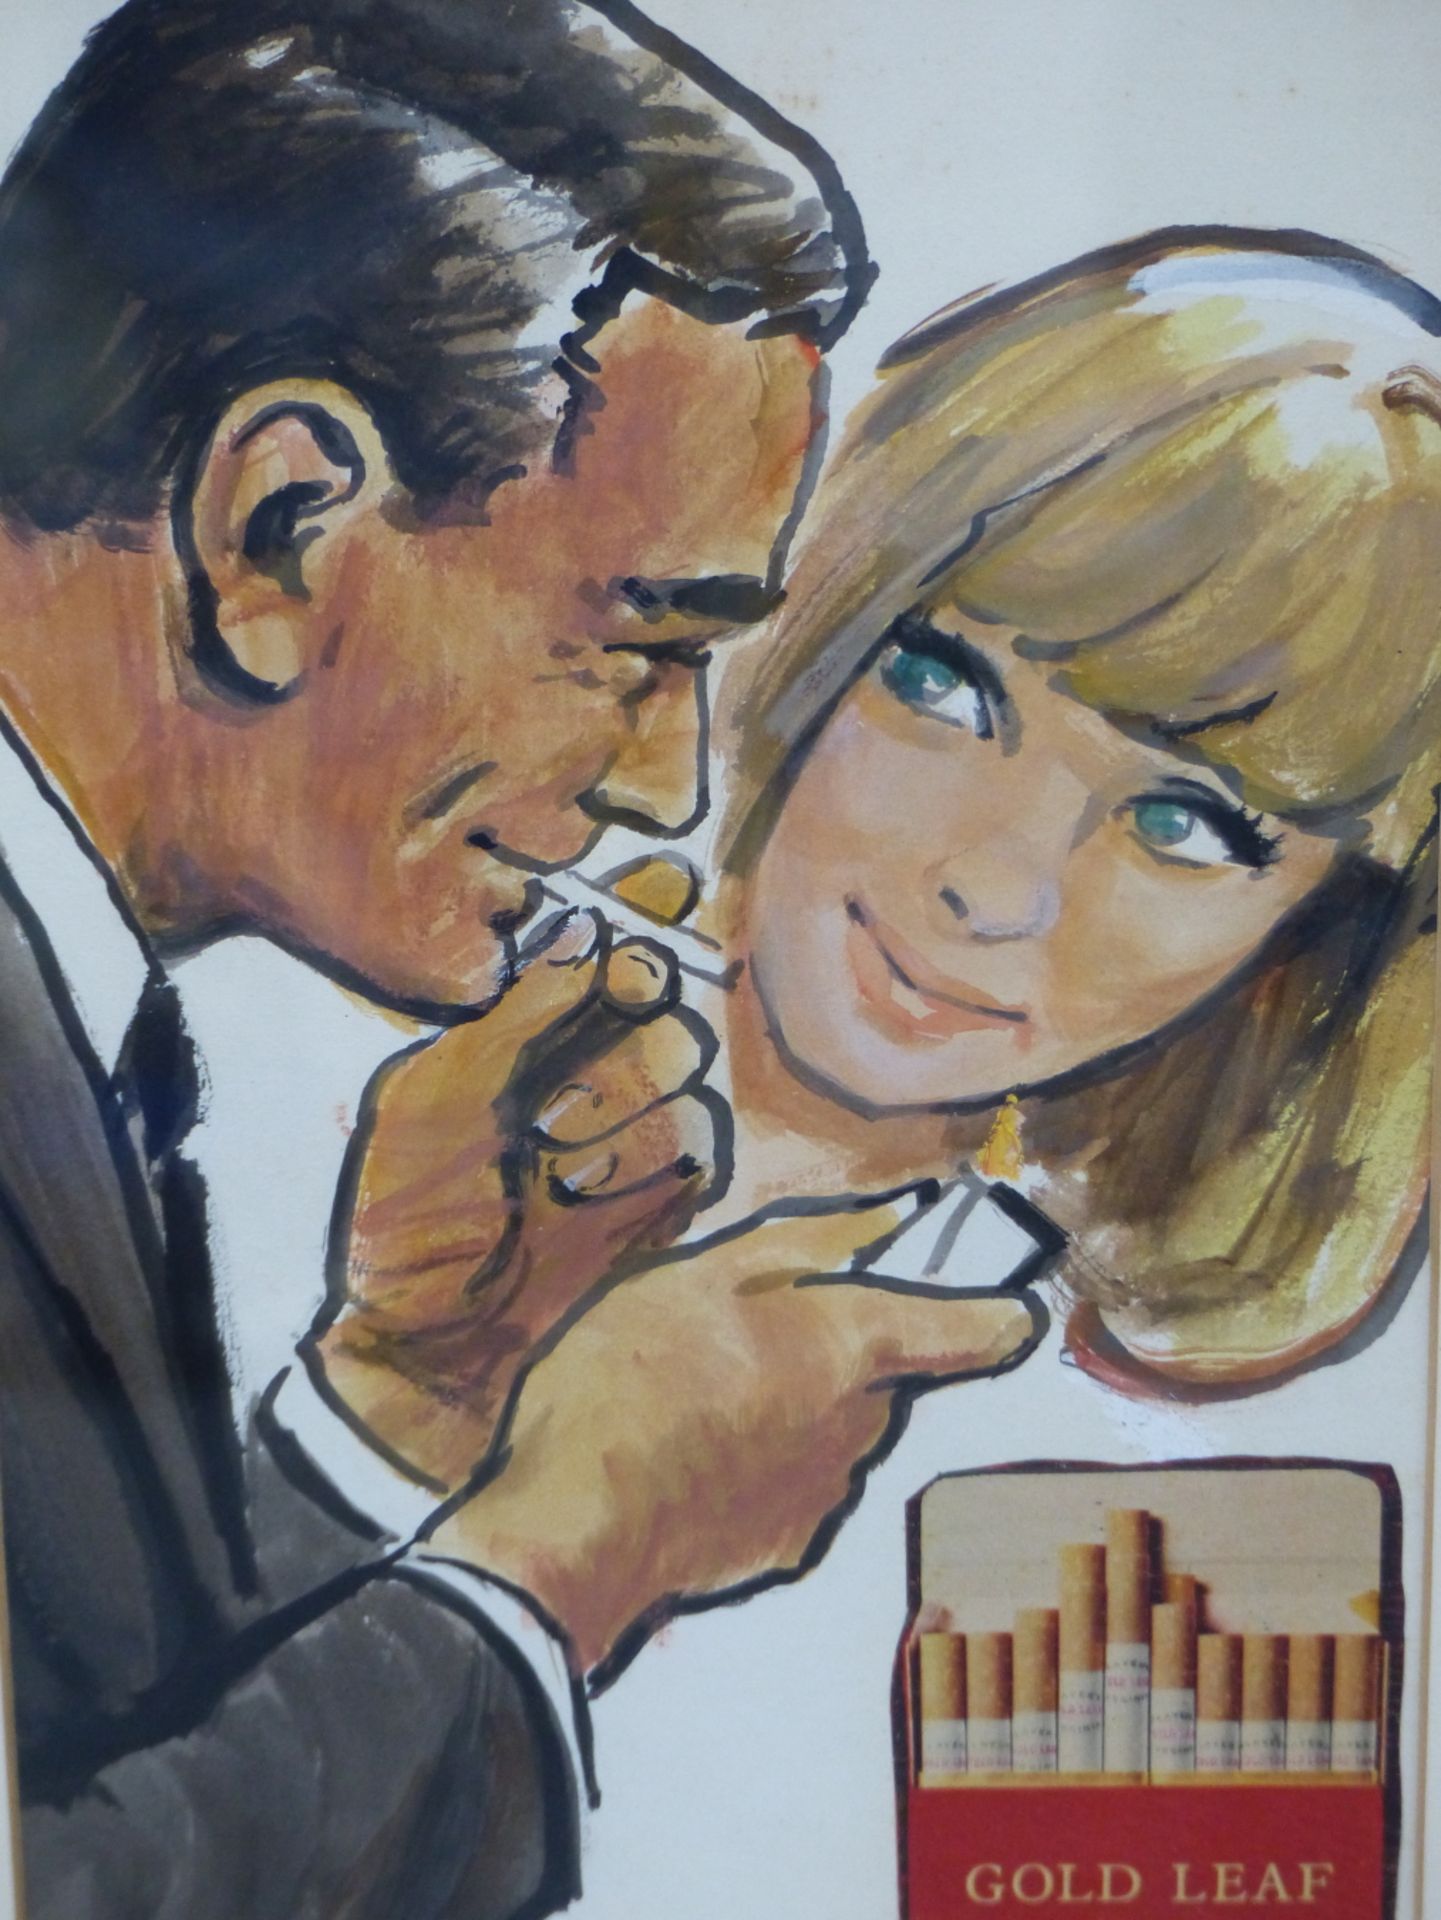 CONTEMPORARY 20THC. PLAYERS GOLD LEAF CIGARETTES ORIGINAL 1950S ADVERTISING PASTE UP ART, UNSIGNED - Image 2 of 4